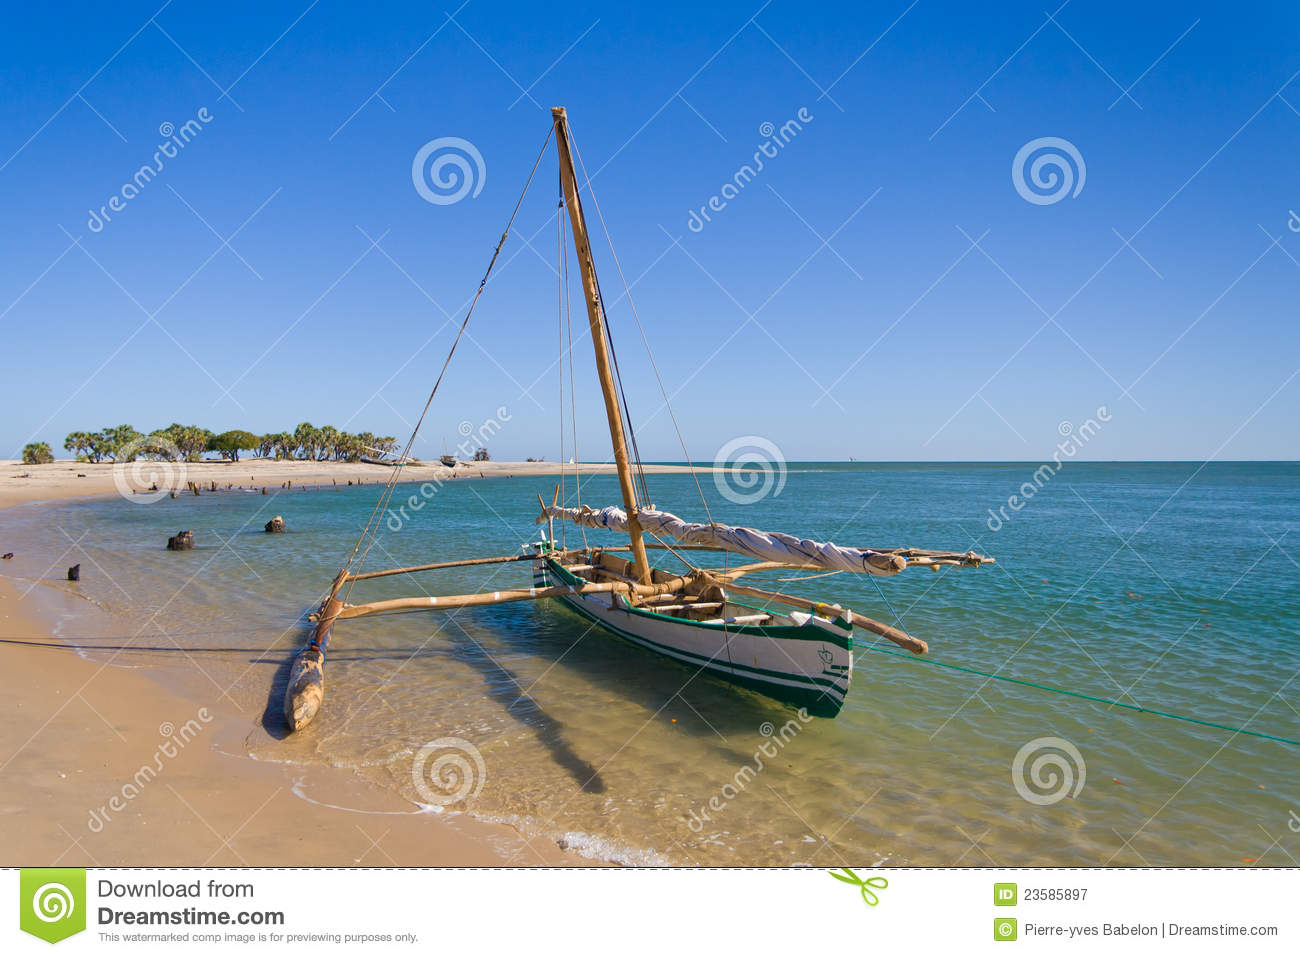 Outrigger Canoe Royalty Free Stock Photography   Image  23585897